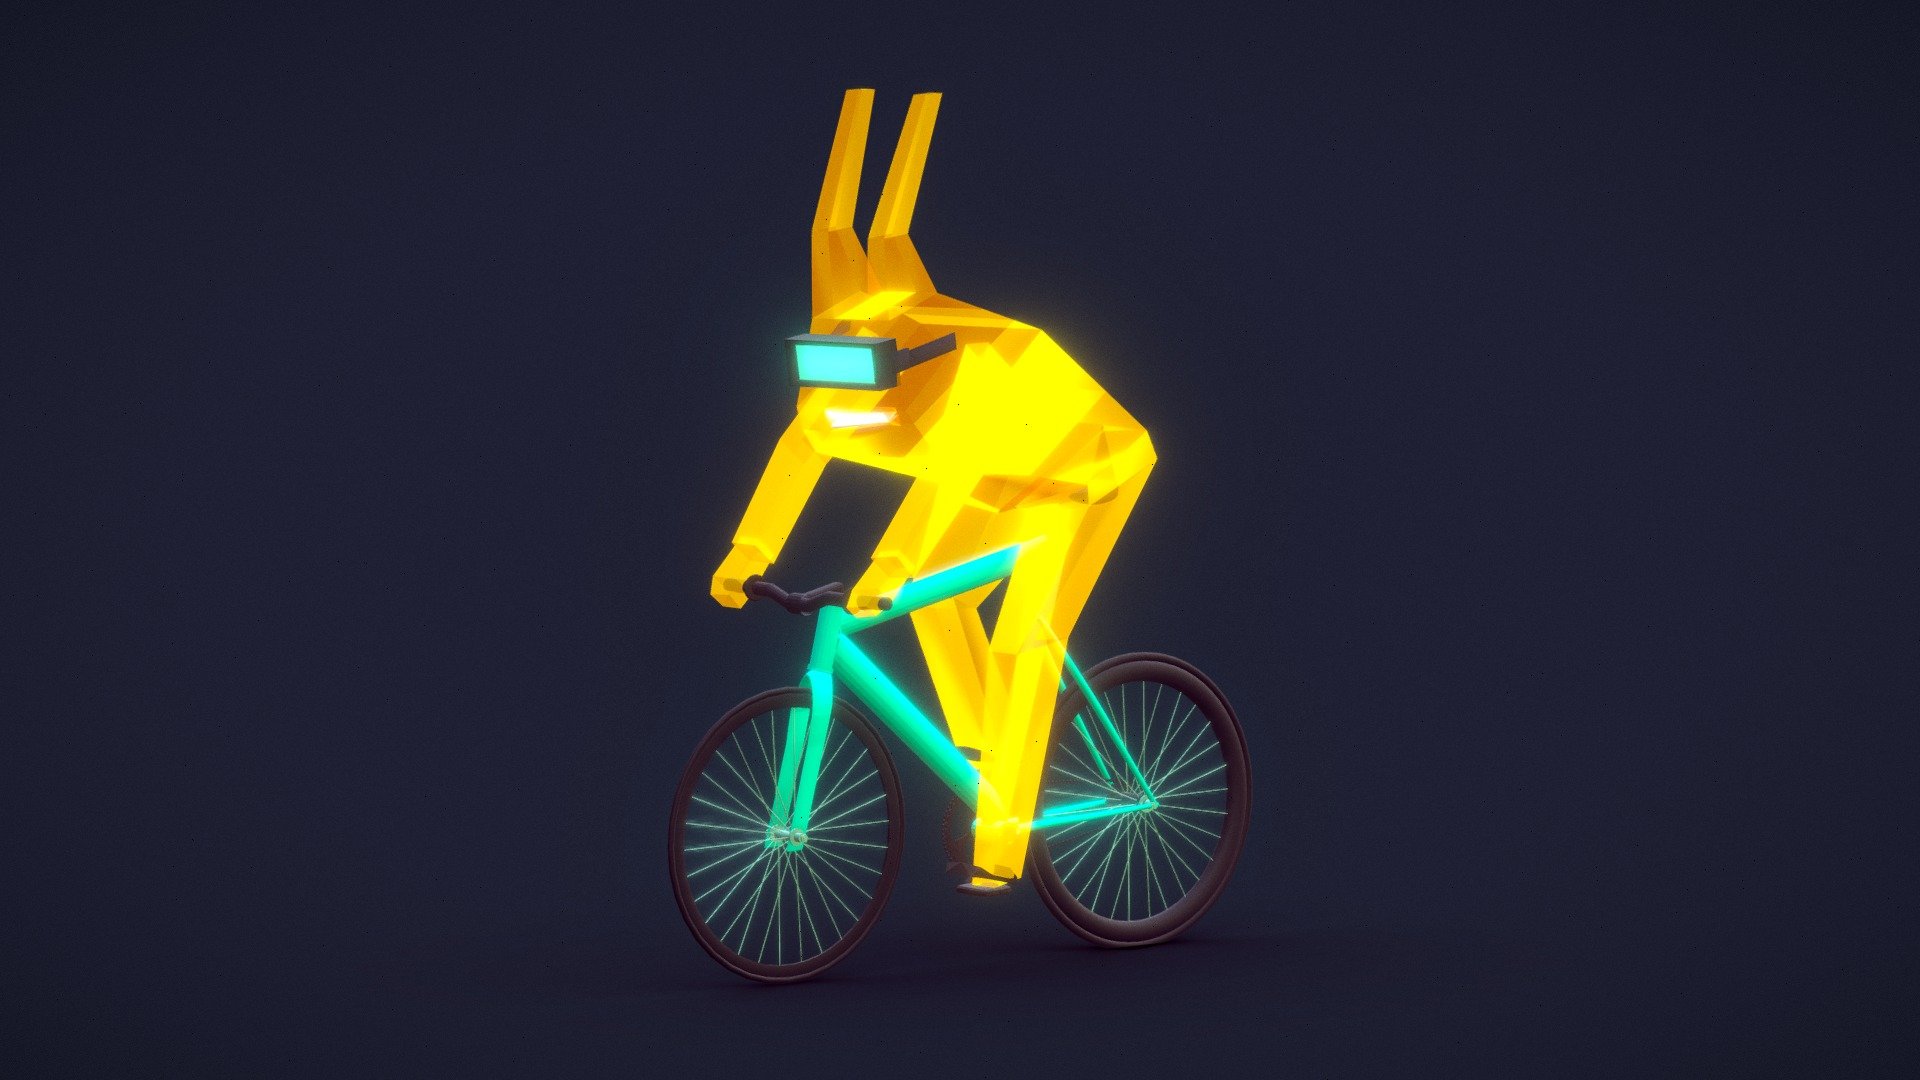 Character is created on Cinema 4d. Post effects and render on SketchFab

Procedural Textured
 - Galaxy Rider Rabbit - Download Free 3D model by antonmoek 3d model